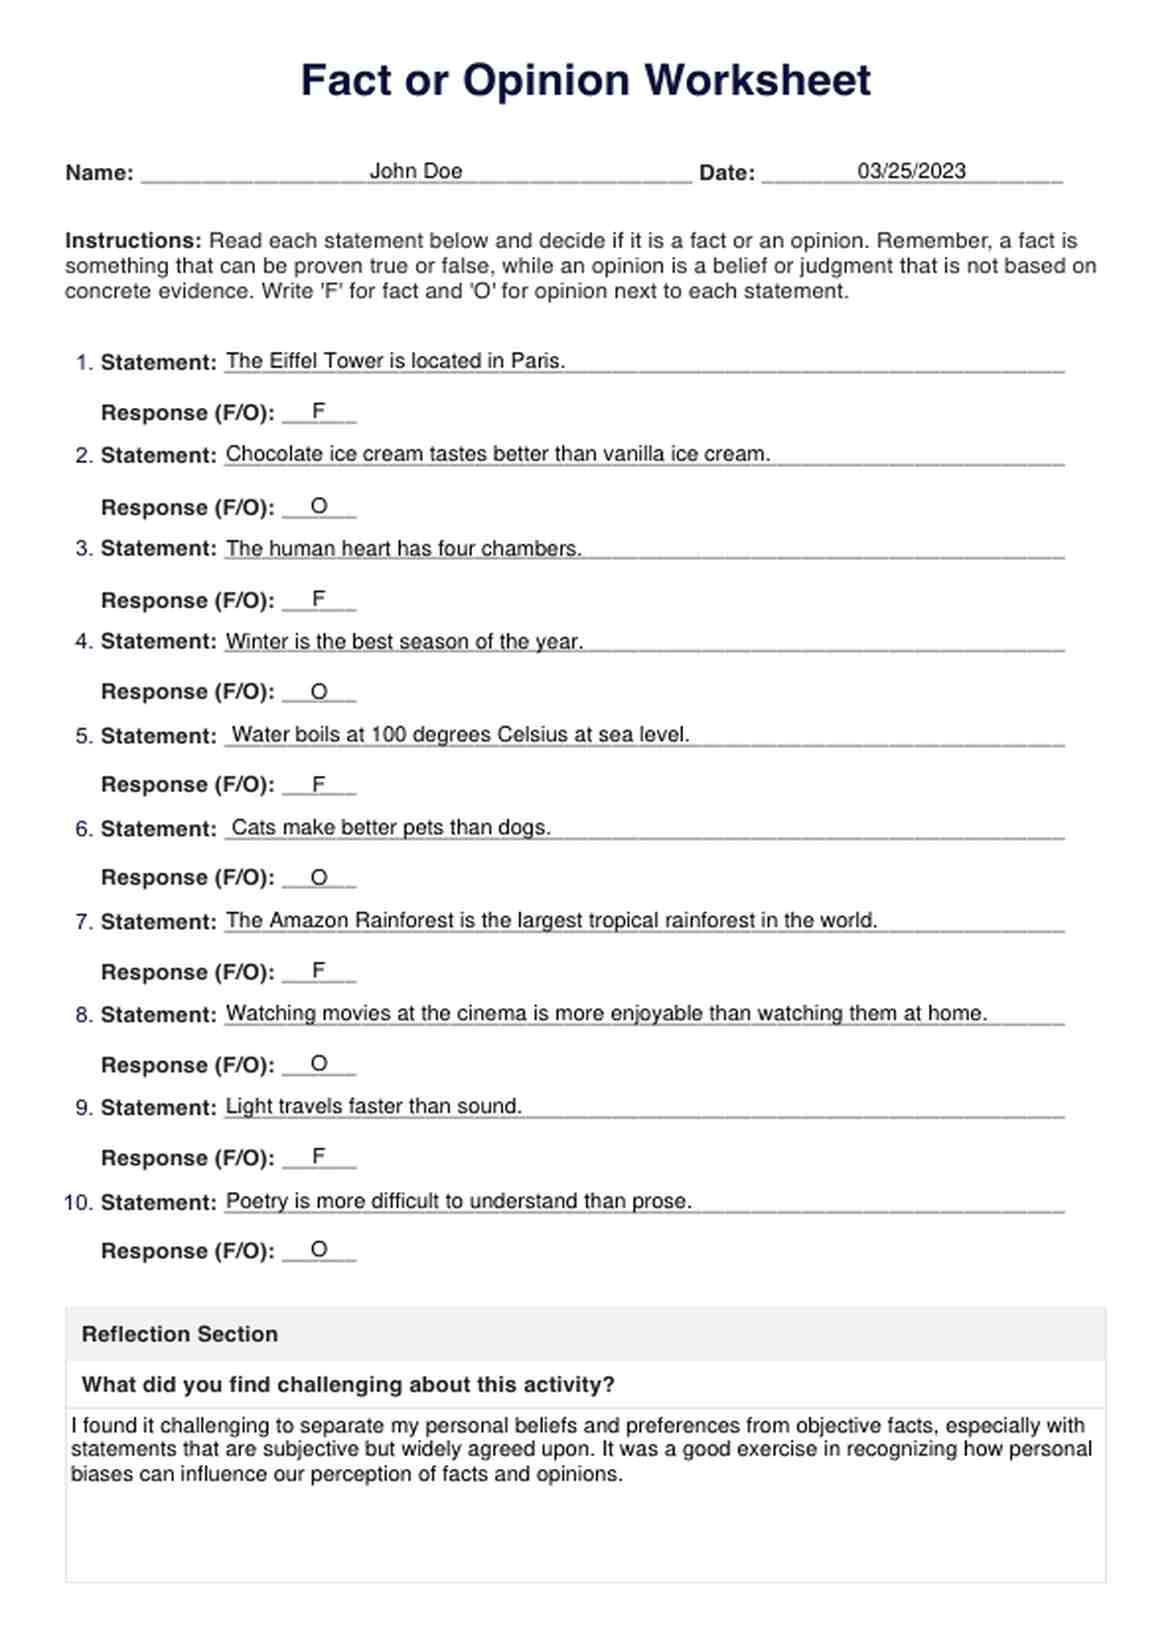 Fact or Opinion Worksheet PDF Example